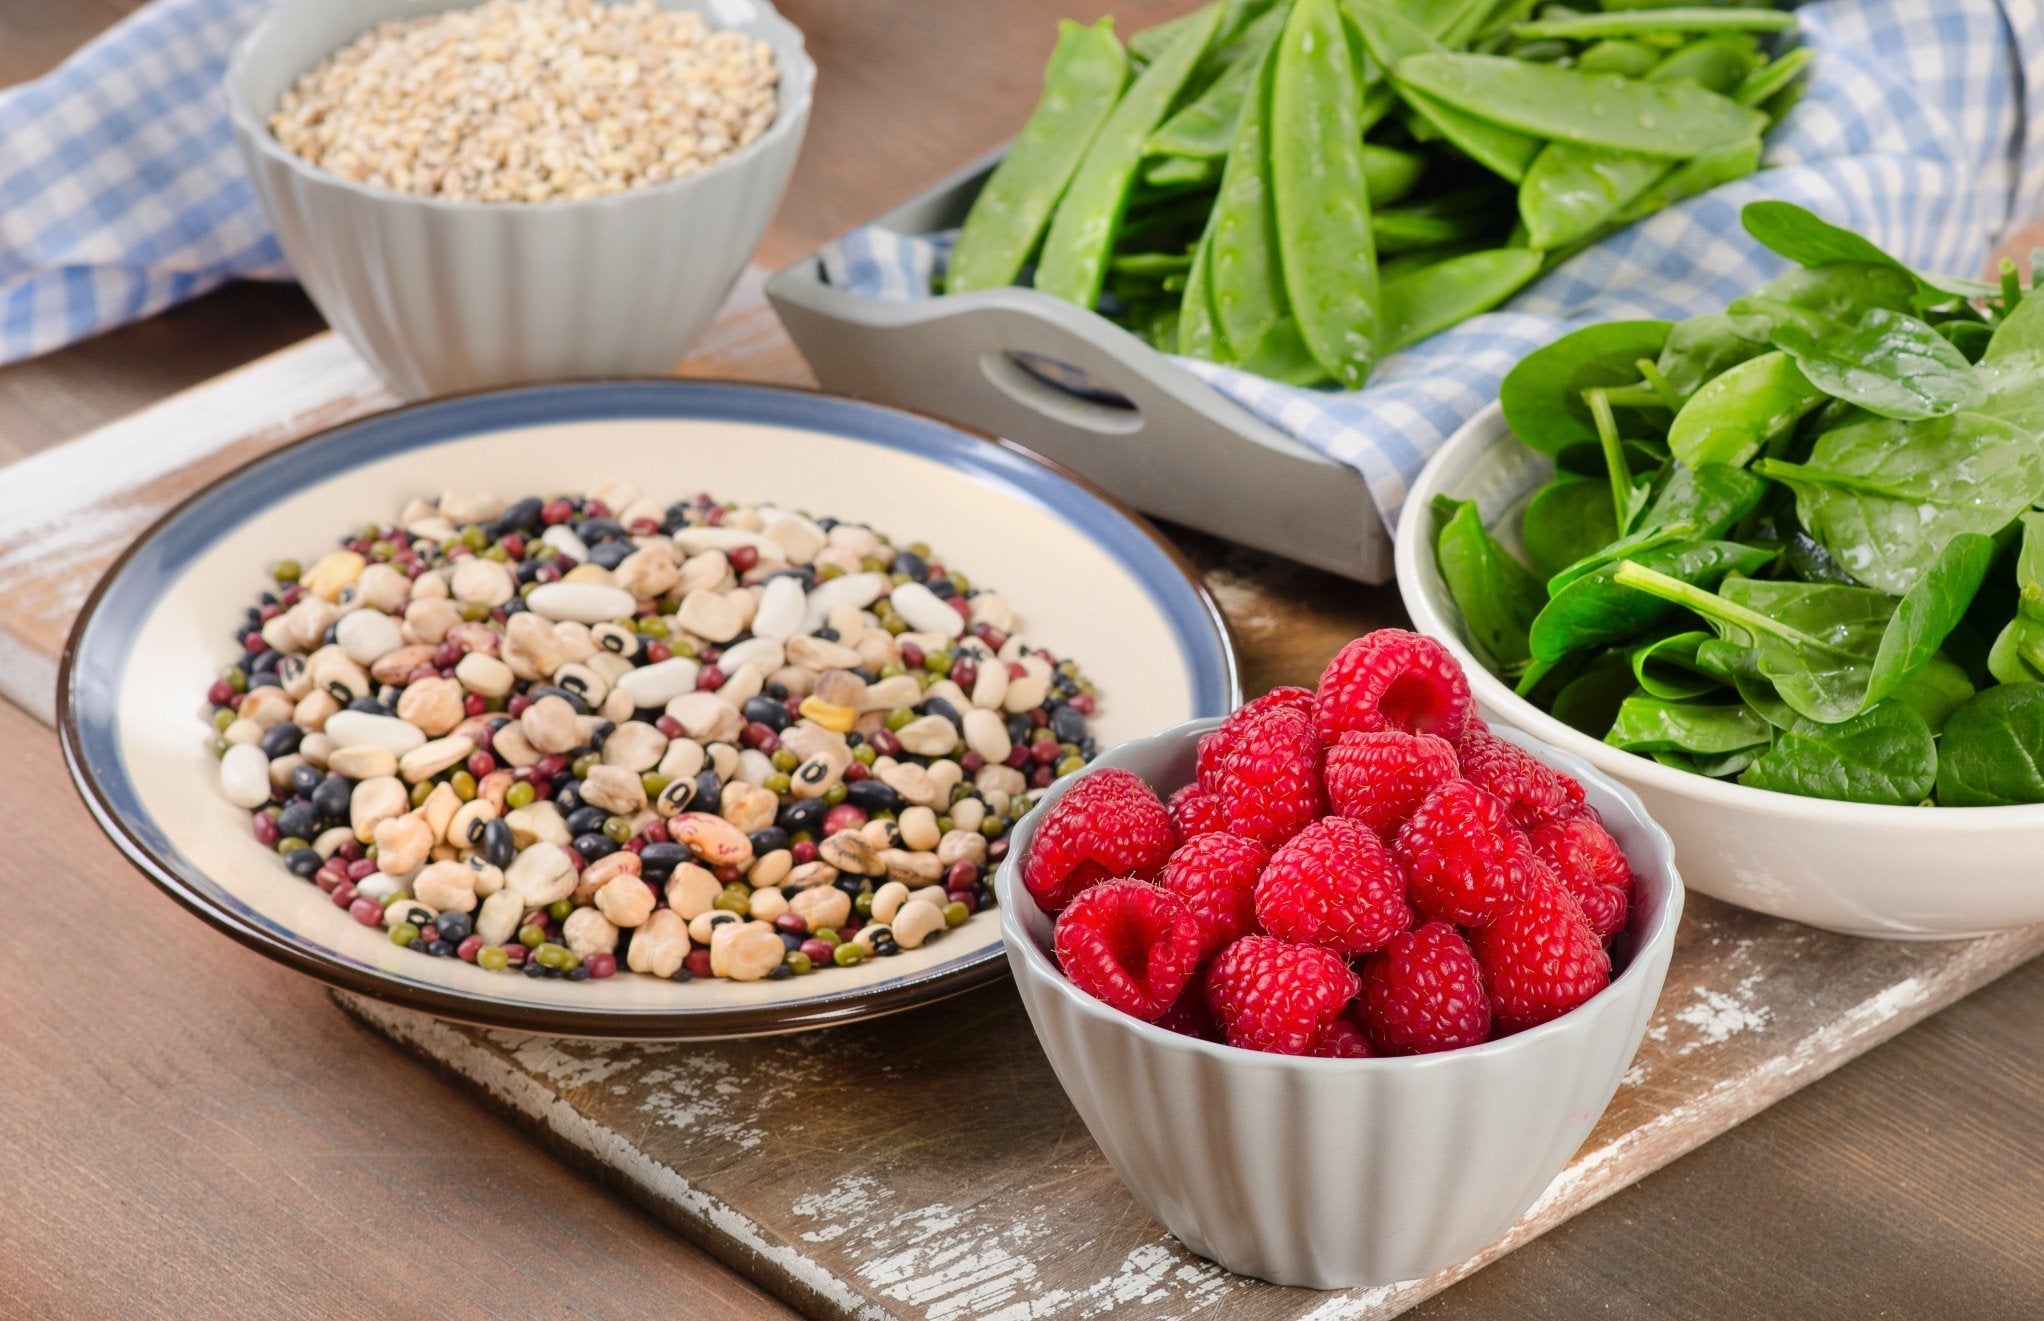 How to Eat a High-Fiber Diet: The Best Fiber Supplements, Foods, and Snacks